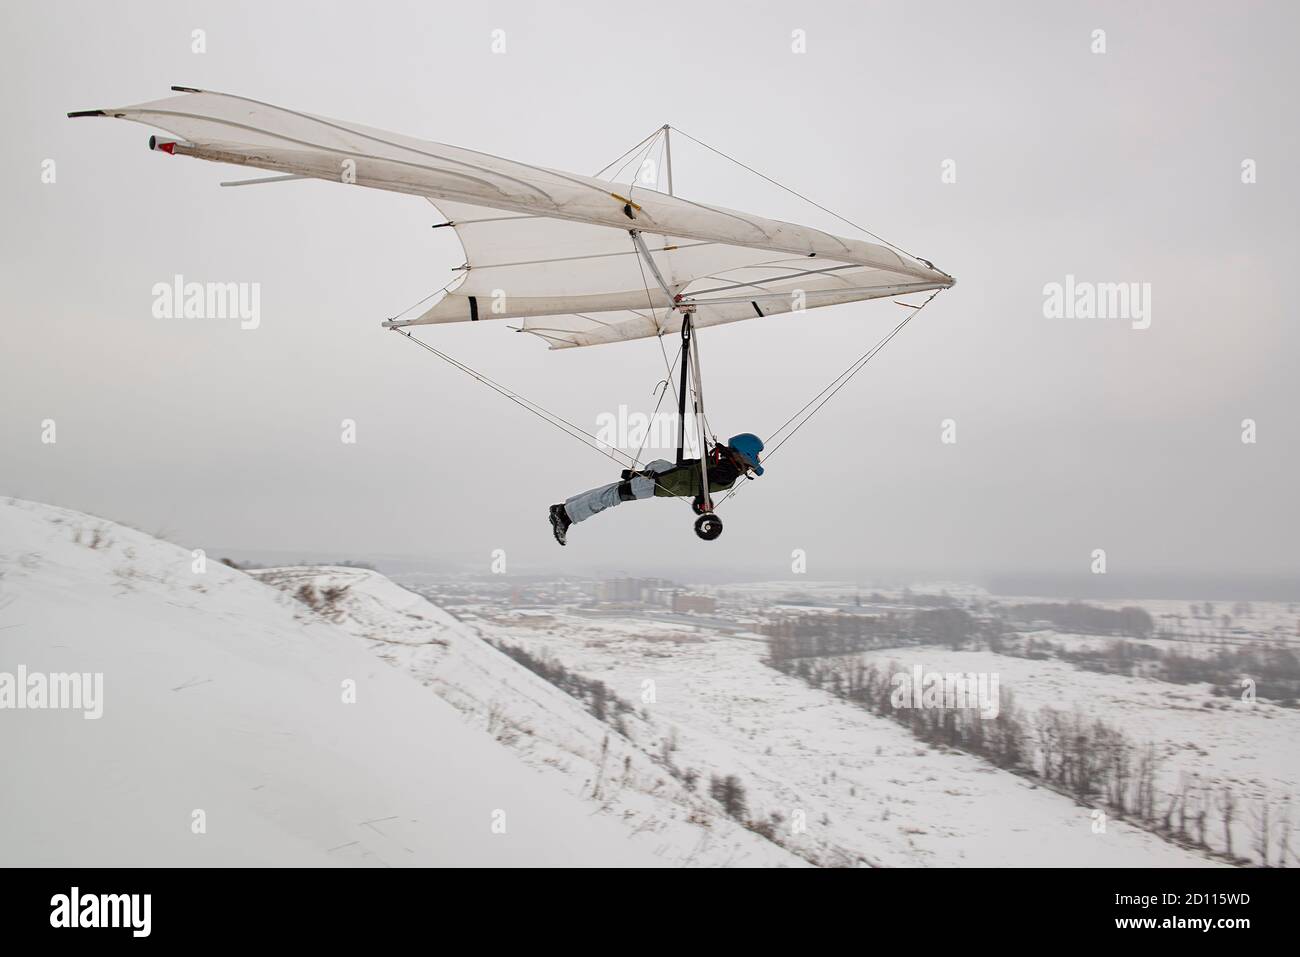 Student hang glider pilot on the training hill. Hang glider wing silhouette Stock Photo